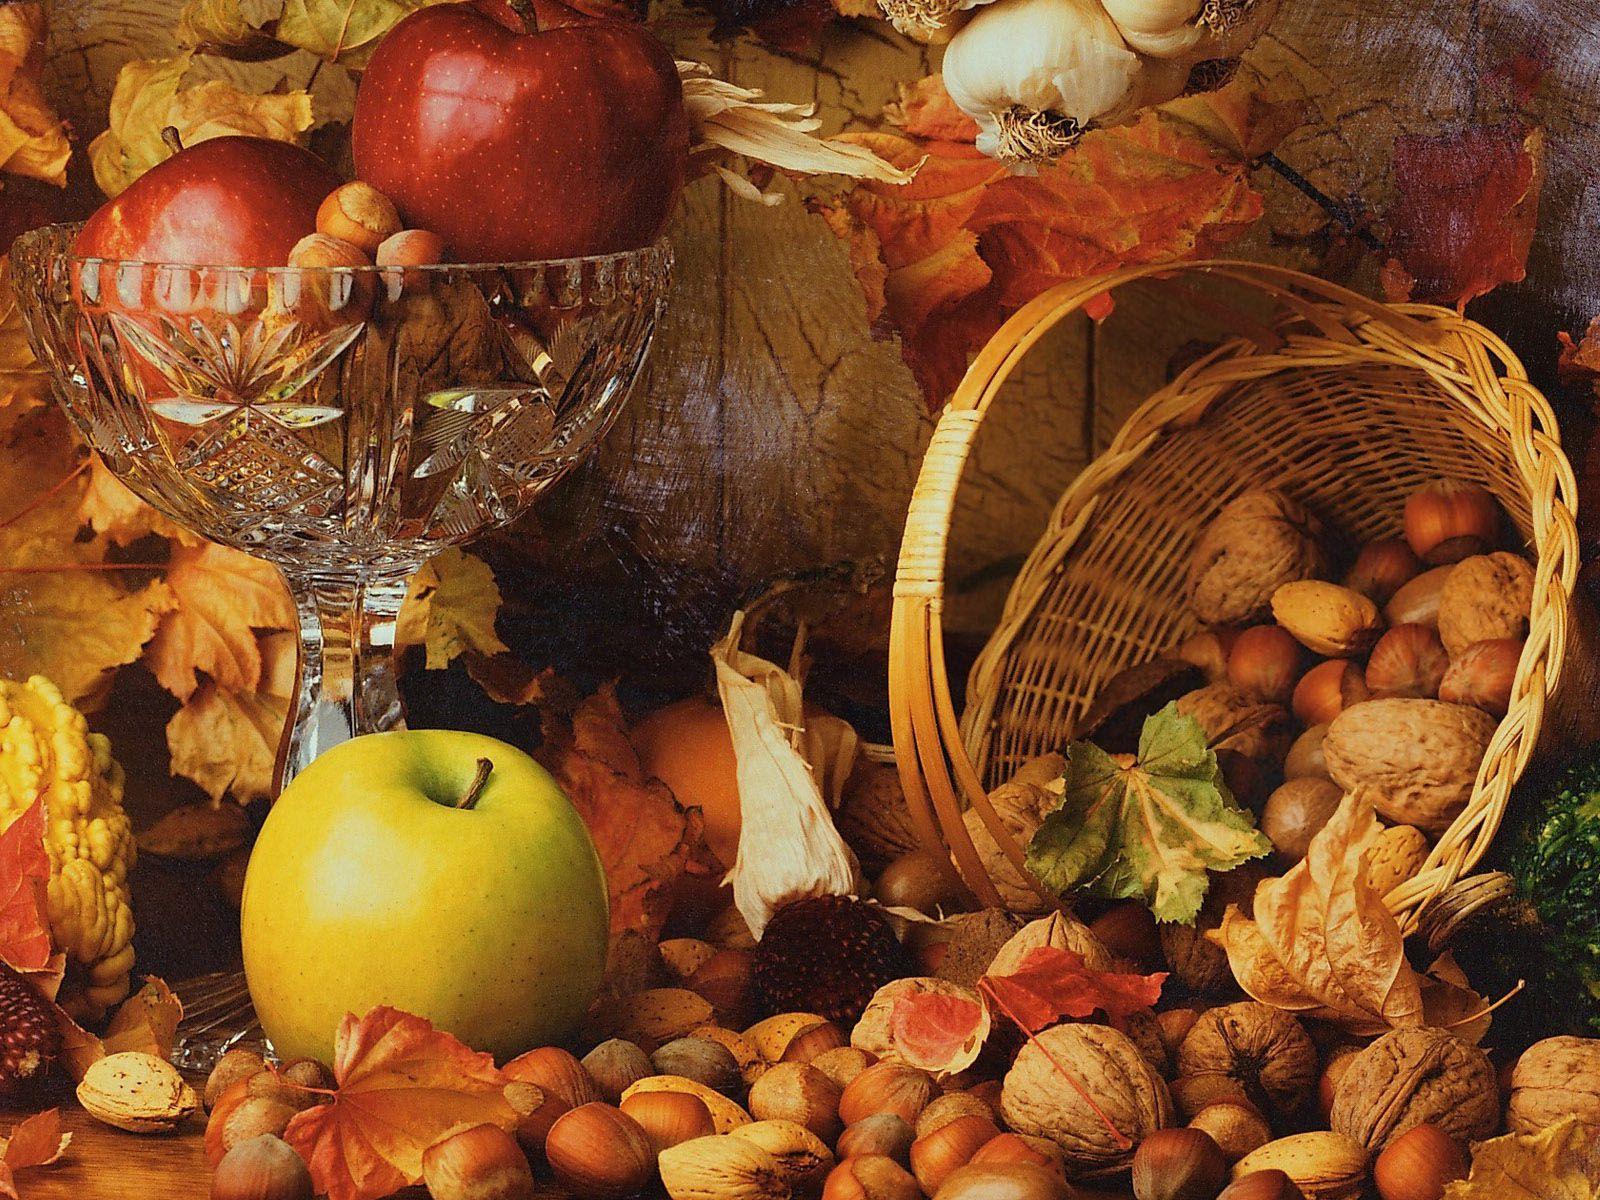 entries in Thanksgiving Day Wallpaper group